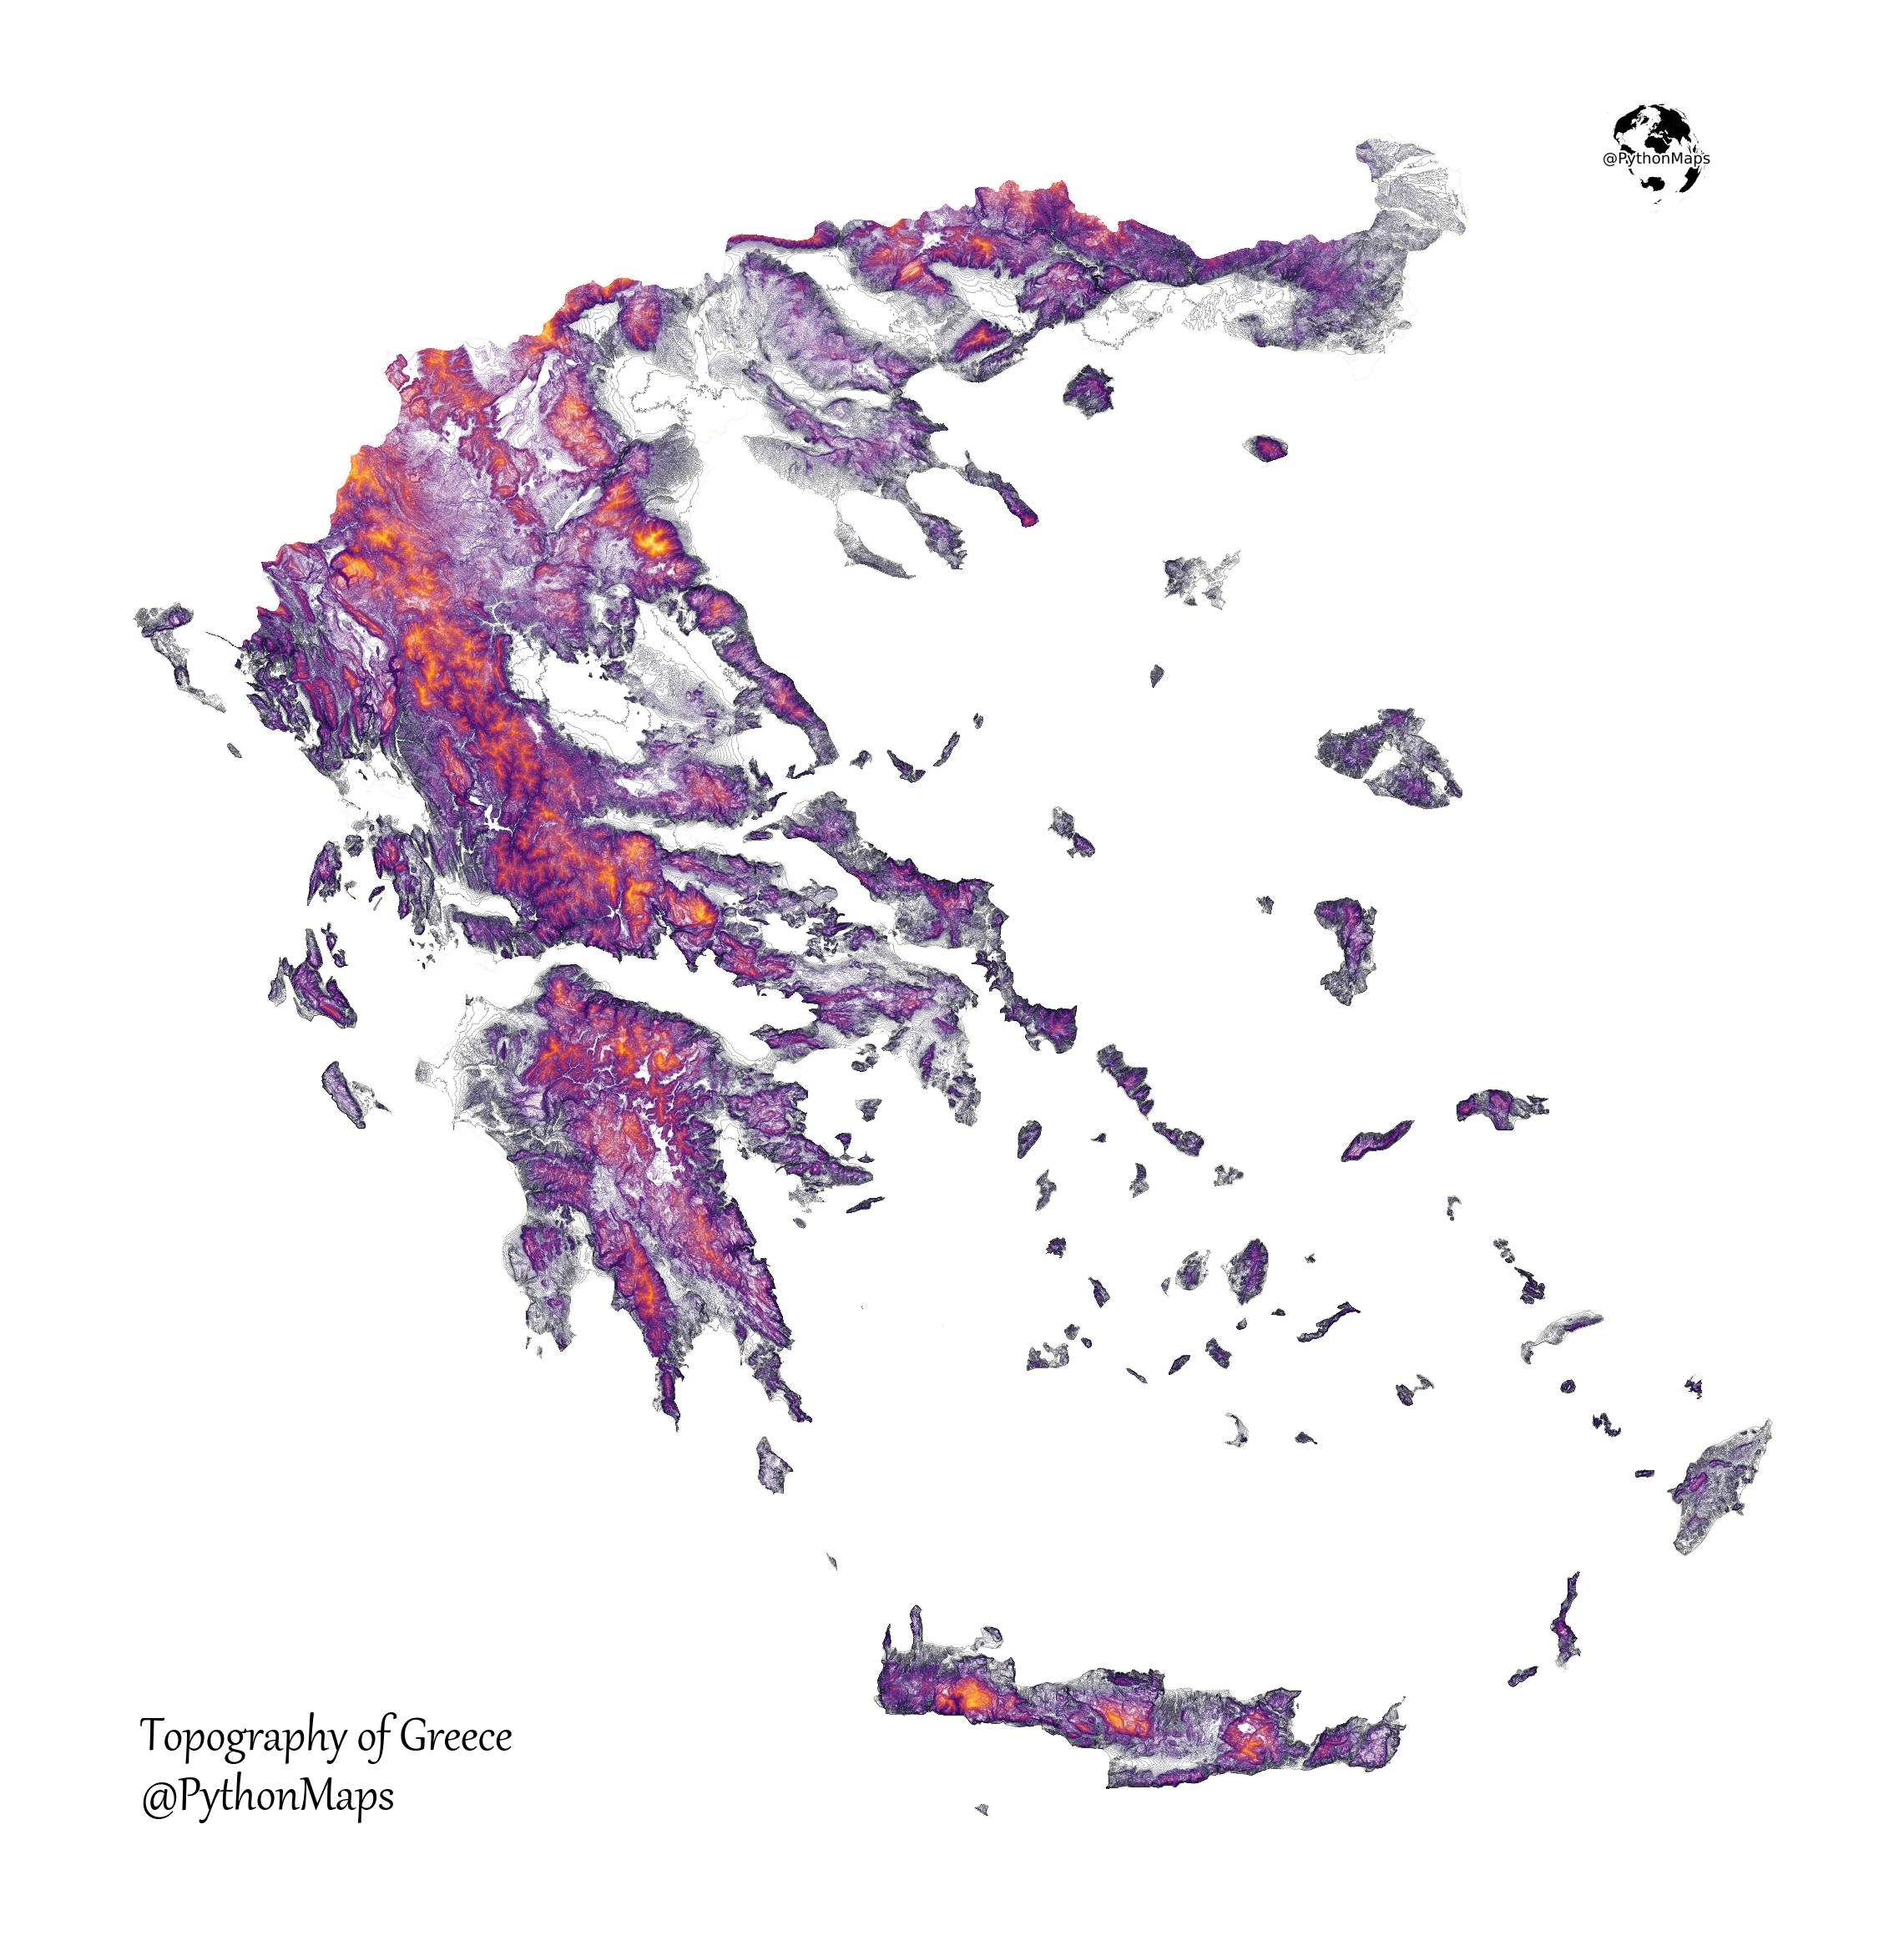 The Topography of Greece